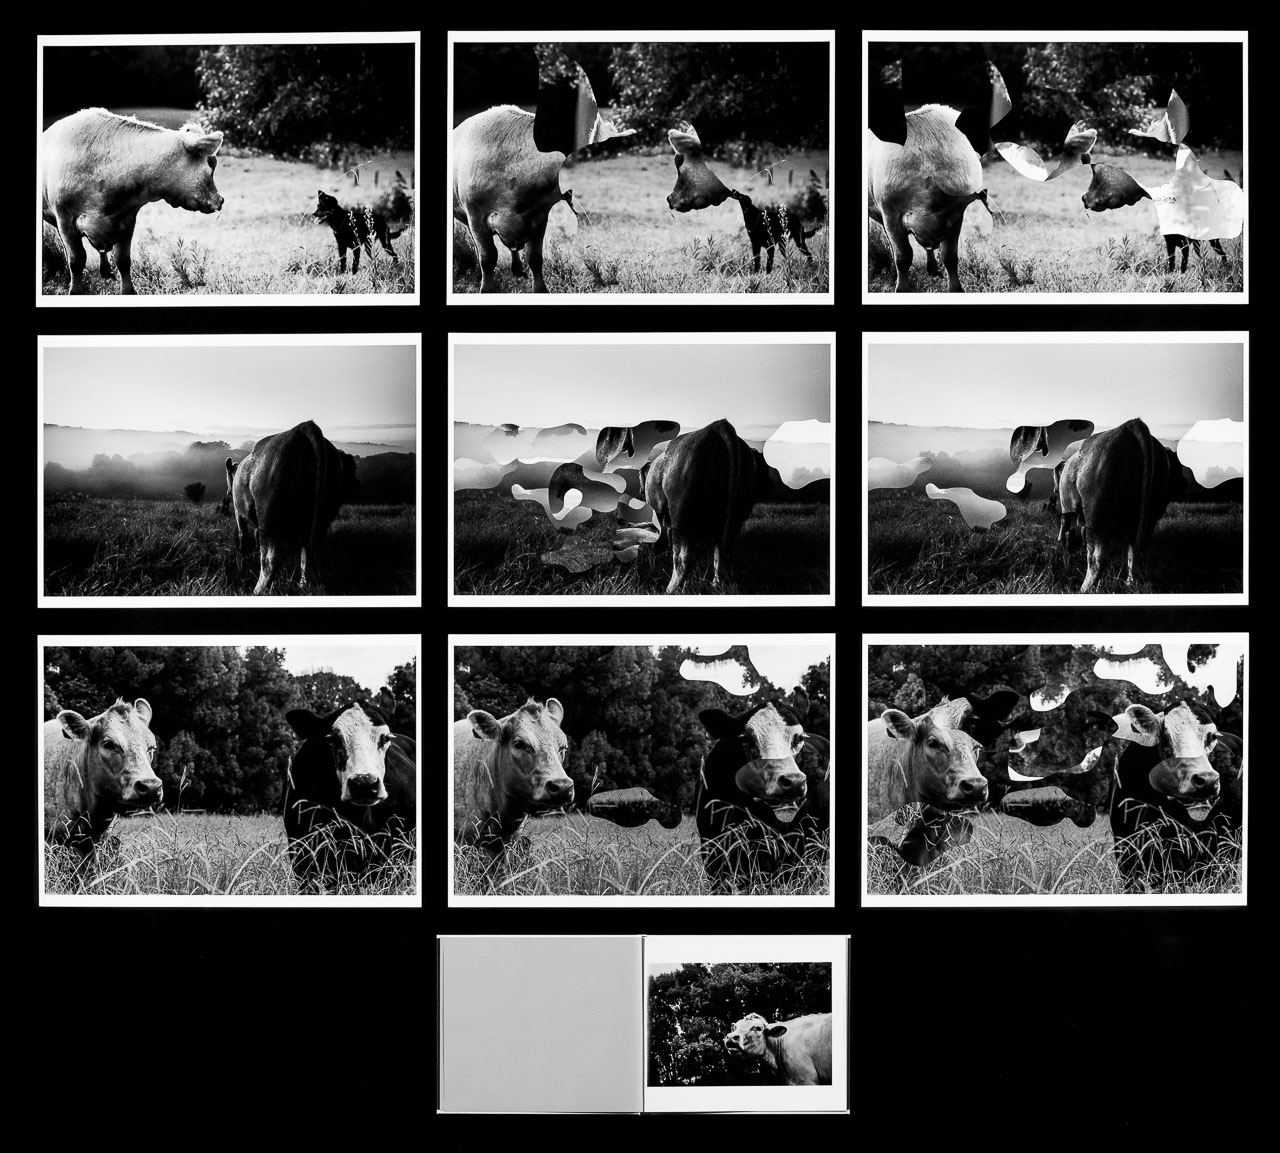 A series of 10 black and white photos of cows in a field that are cutaway in some areas.